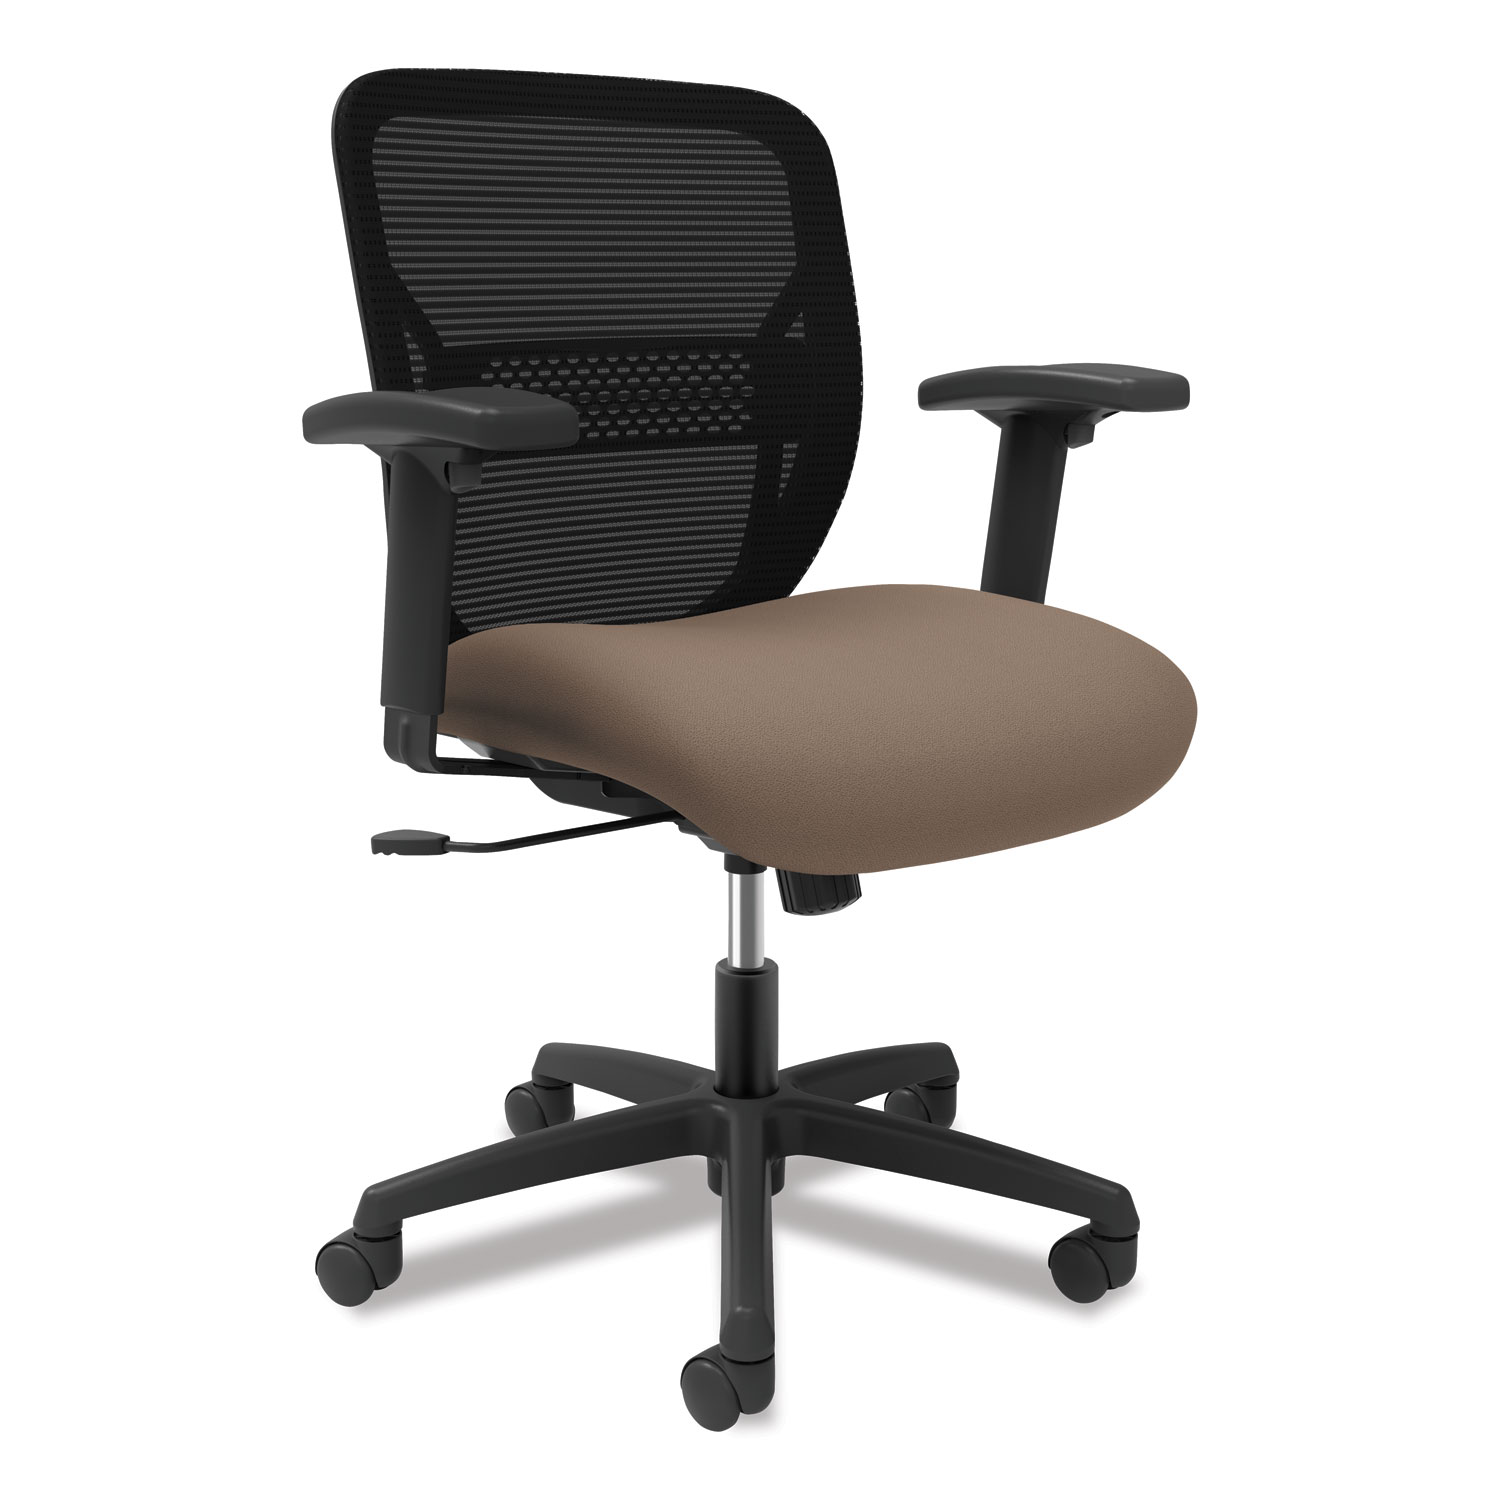  HON HONGTHMZ1CU24 Gateway Mid-Back Task Chair with Adjustable Arms, Supports Up to 250 lbs, Morel Seat, Black Back, Black Base (HONGTHMZ1CU24) 